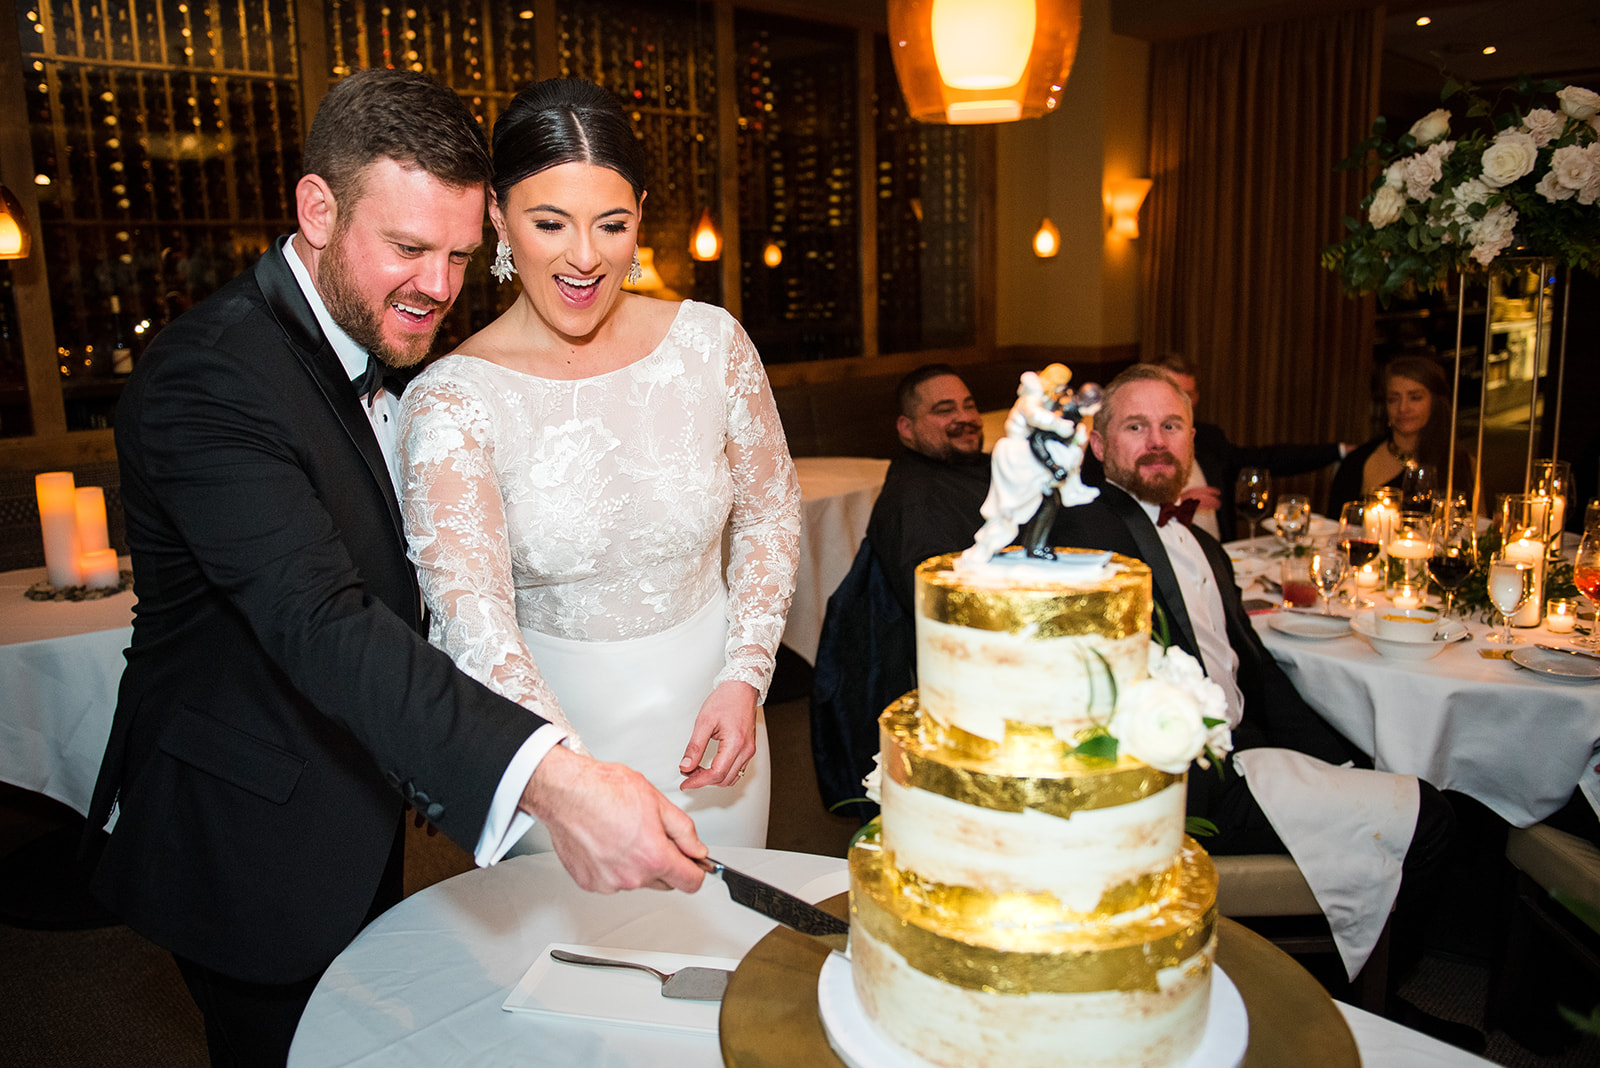 Bride and groom cut their wedding cake with smiling faces.